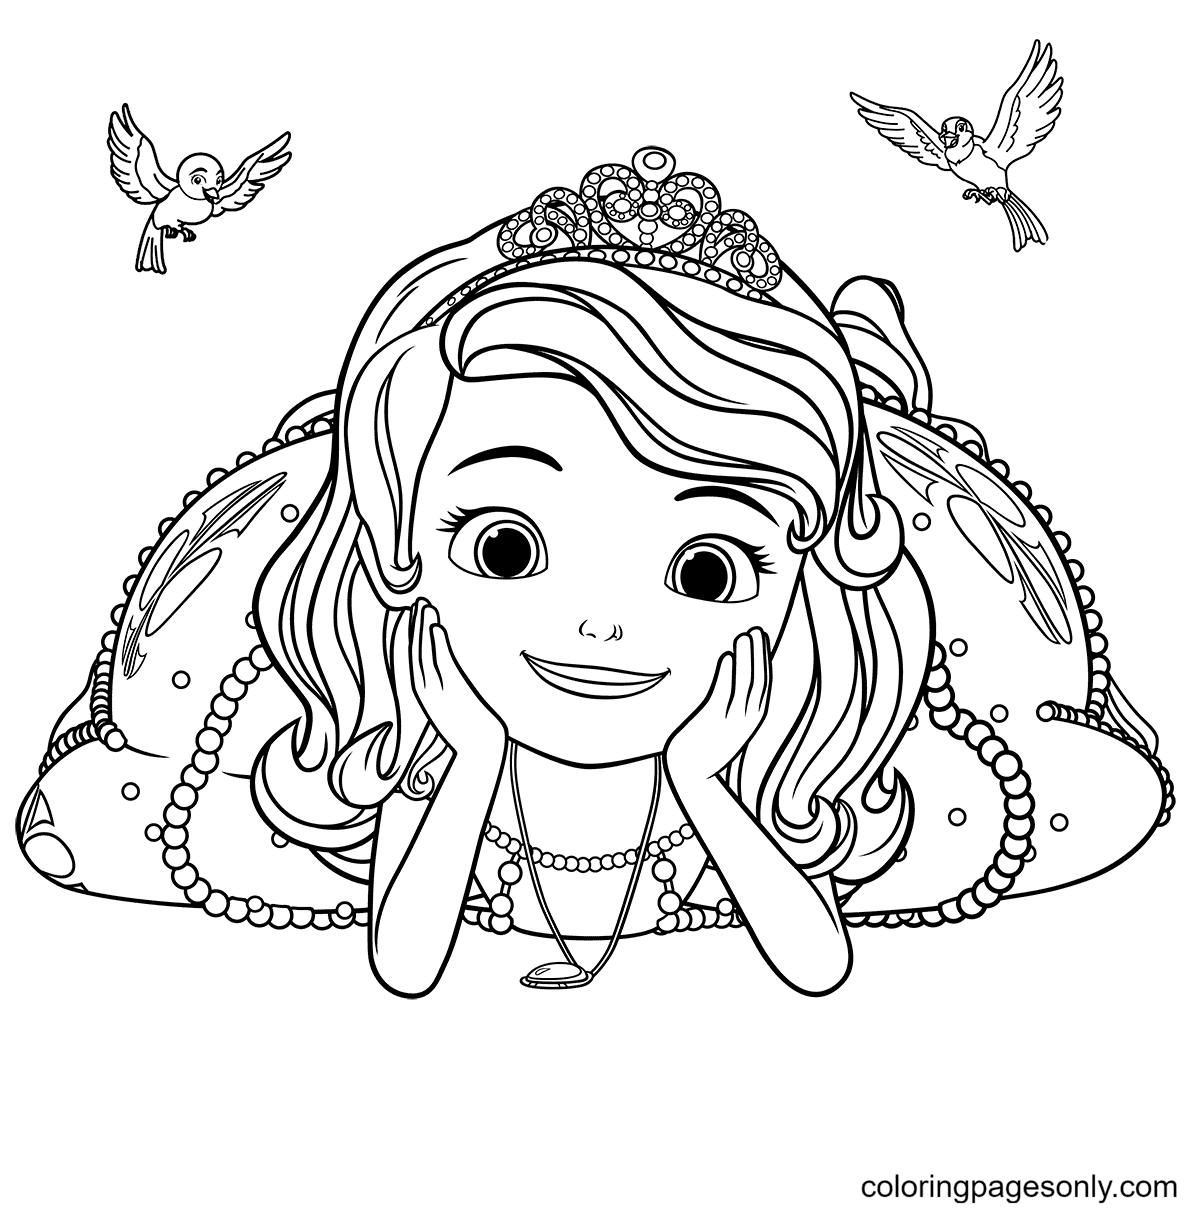 Lovely Sofia Coloring Pages   Sofia The First Coloring Pages ...